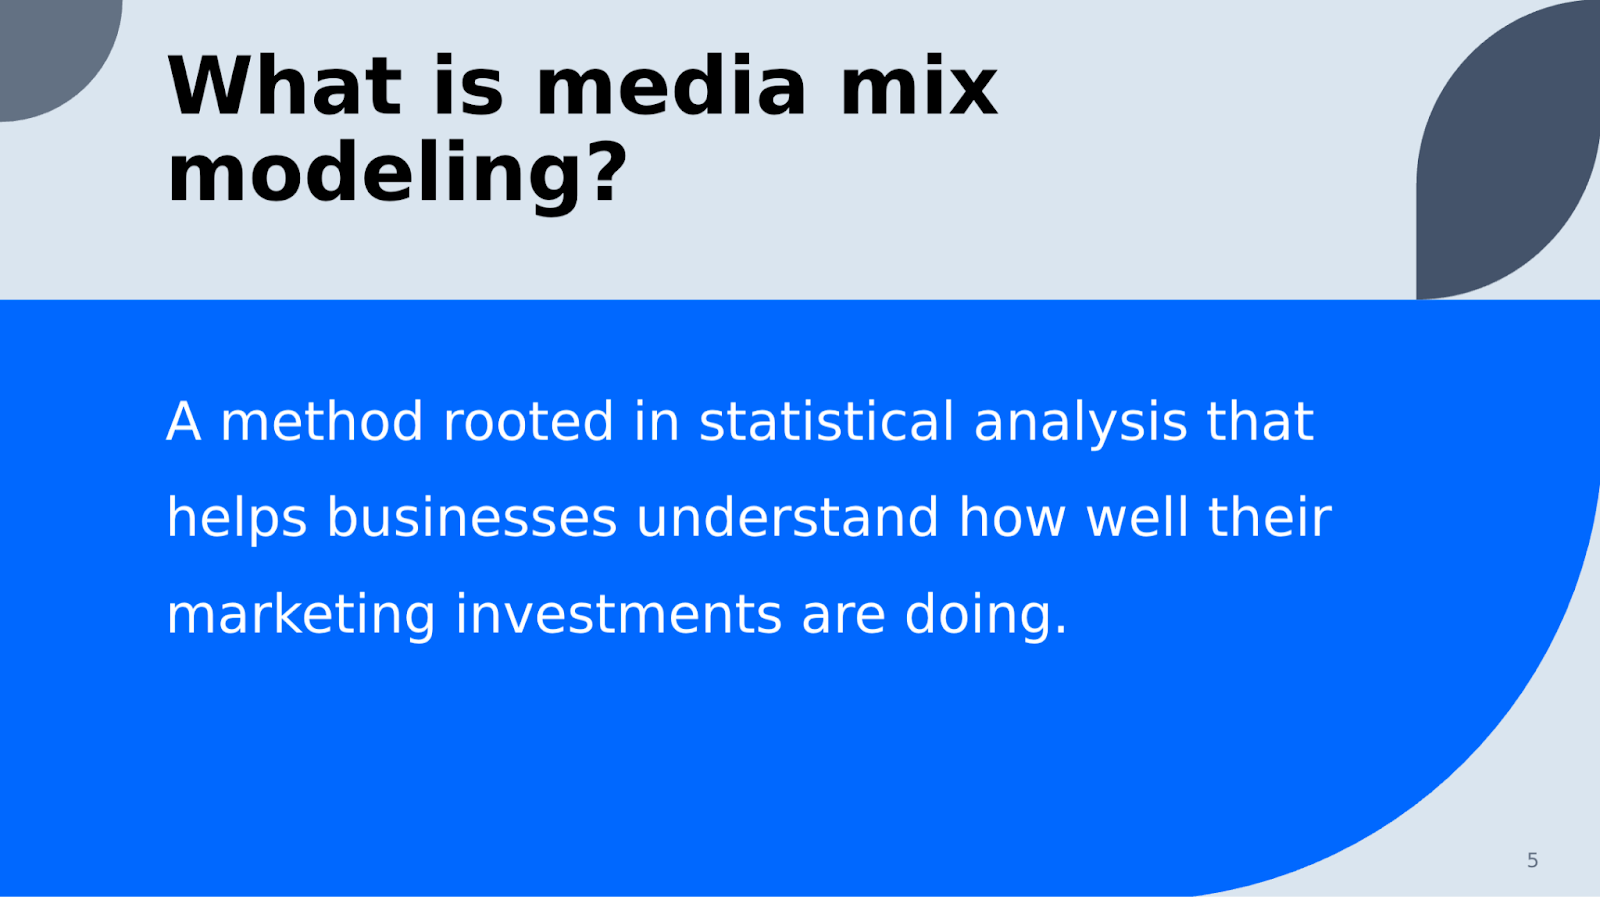 What is media mix modeling? A method rooted in statistical analysis that helps businesses understand how well their marketing investments are doing.